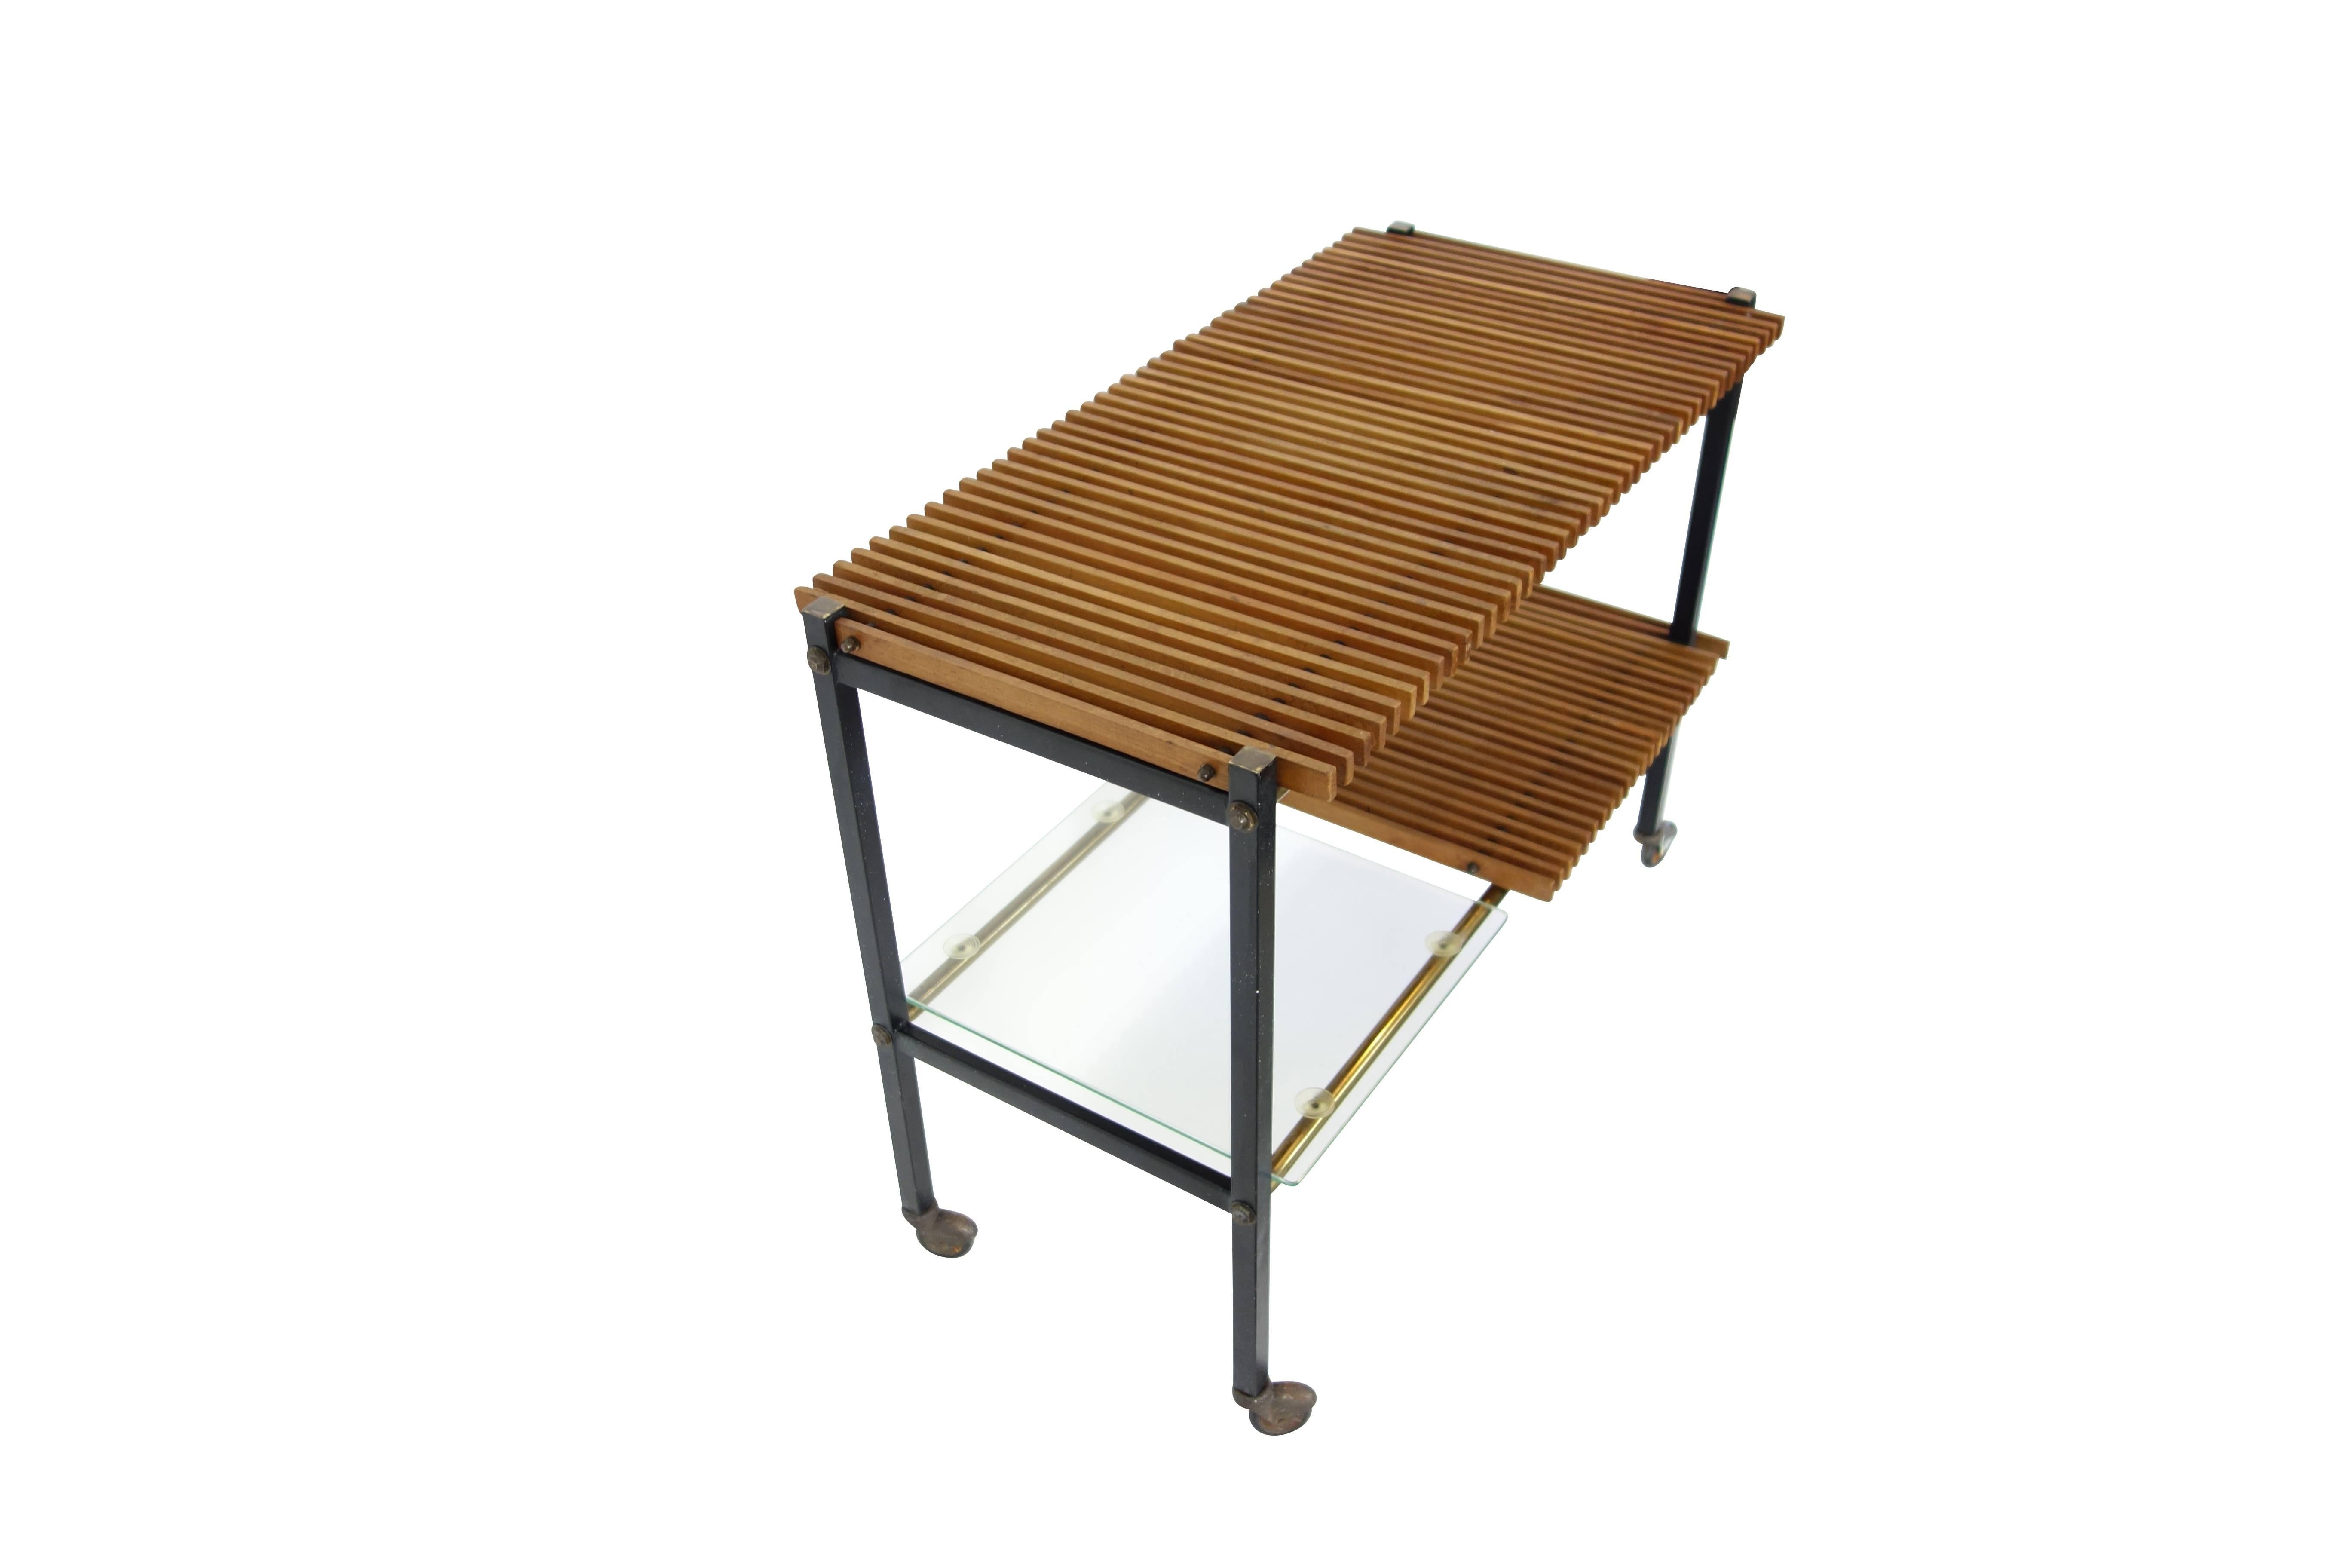 This is a sleek midcentury Italian console table with a slat wood top on casters. The bottom shelf is half slat wood and half glass. The glass portion is held to the frame with four small suction cups.